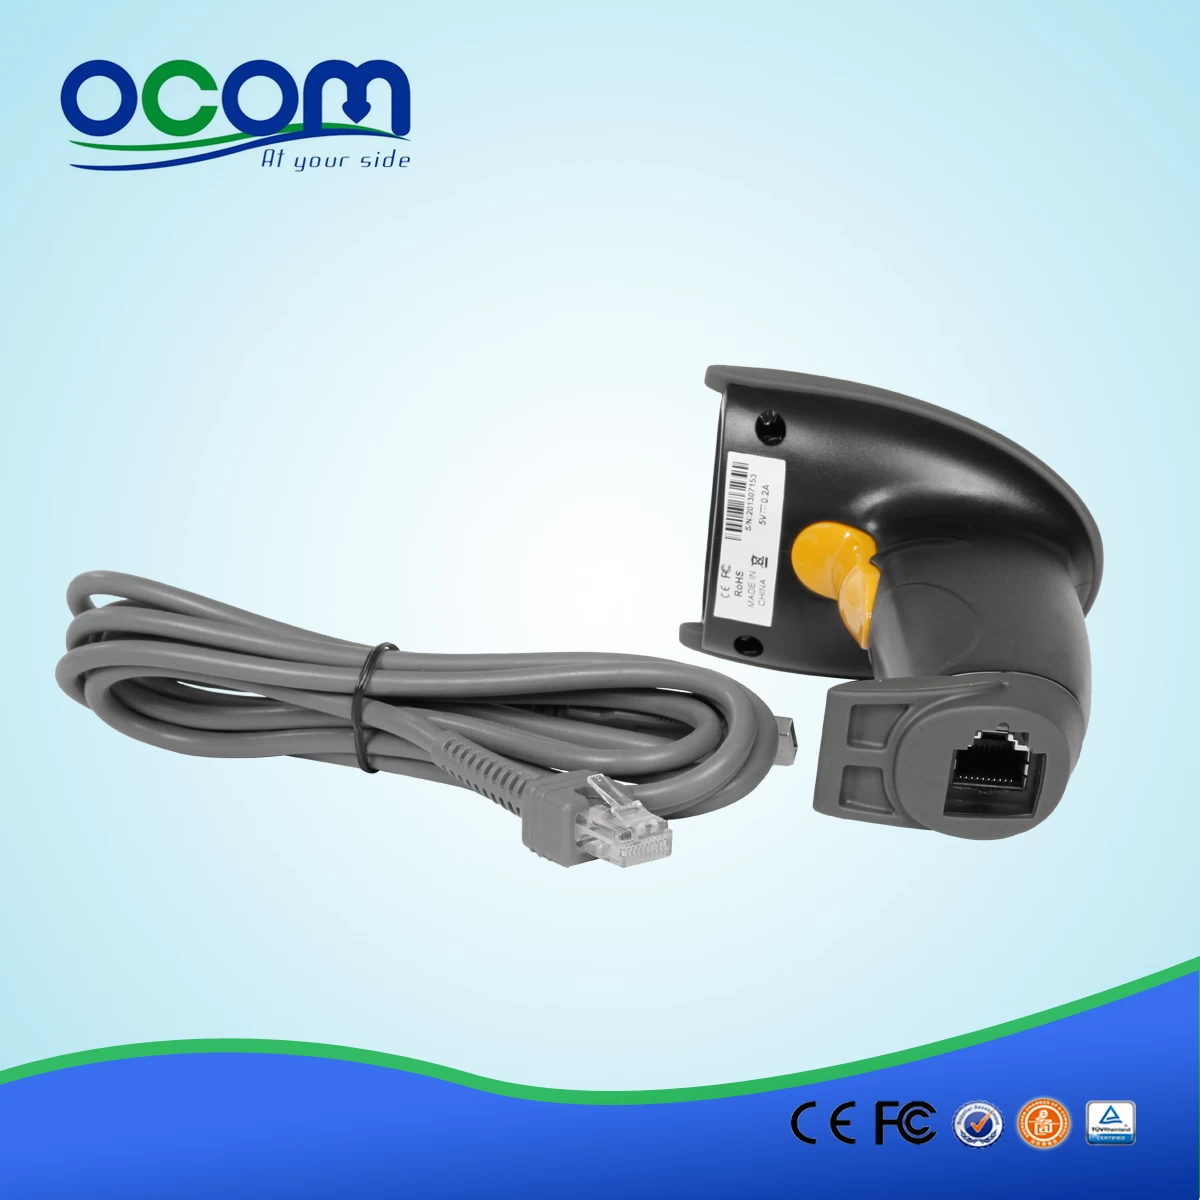 China made high quality laser barcode scanner-OCBS-LA11